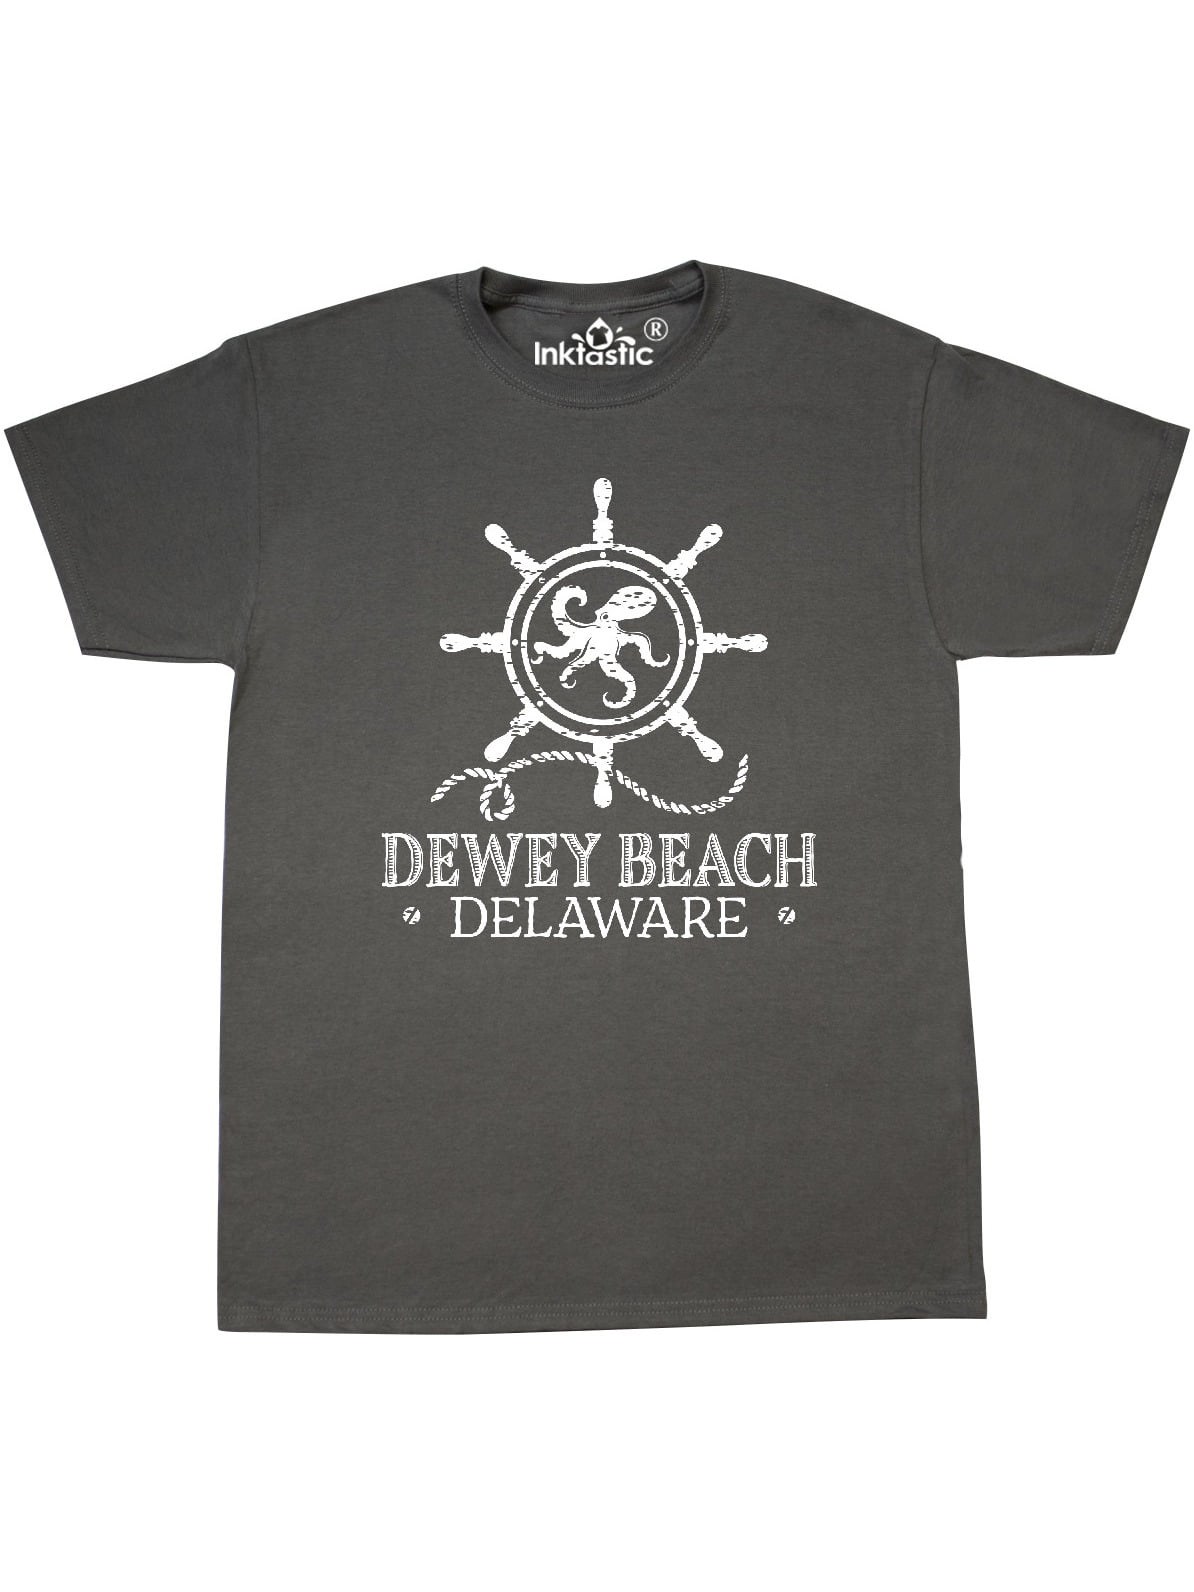 Summer Tee Cute Graphic Tee Custom Shirt Delaware Is Calling Shirt Delaware T-Shirt Moving to Delaware Shirt Delaware Shirt